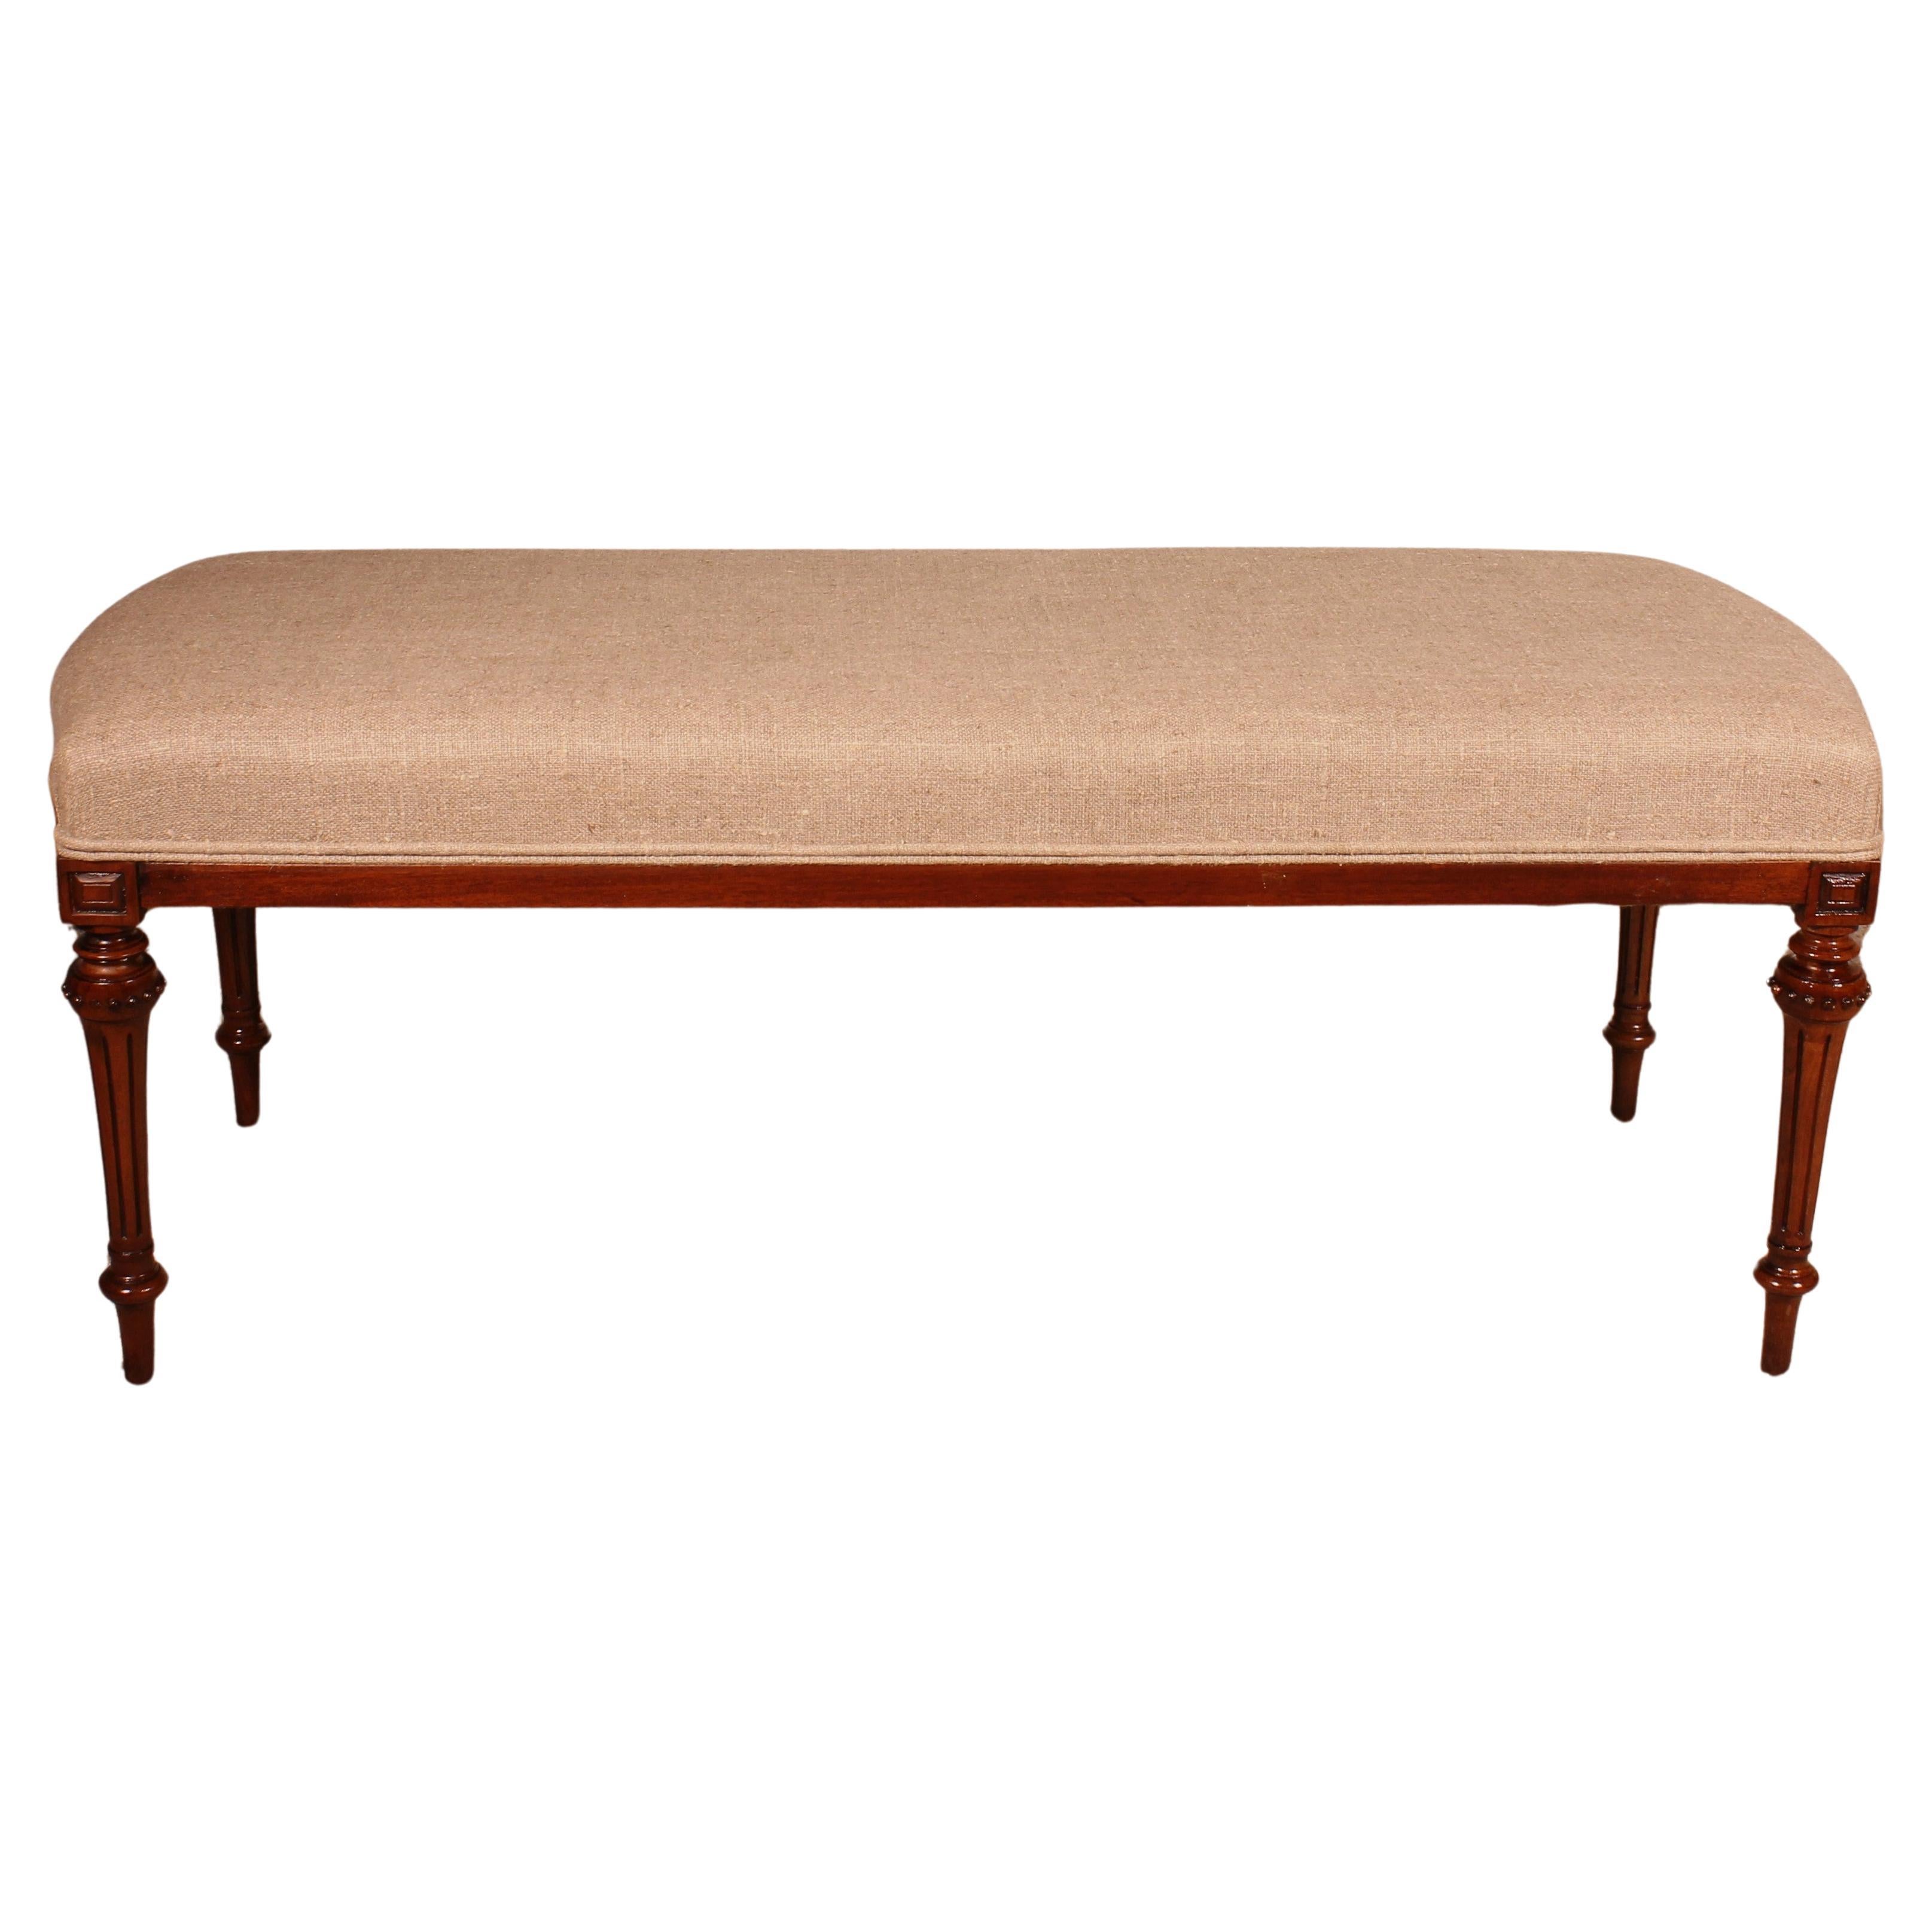 Mahogany Bench From The 19th Century Covered With A Linen Fabric For Sale